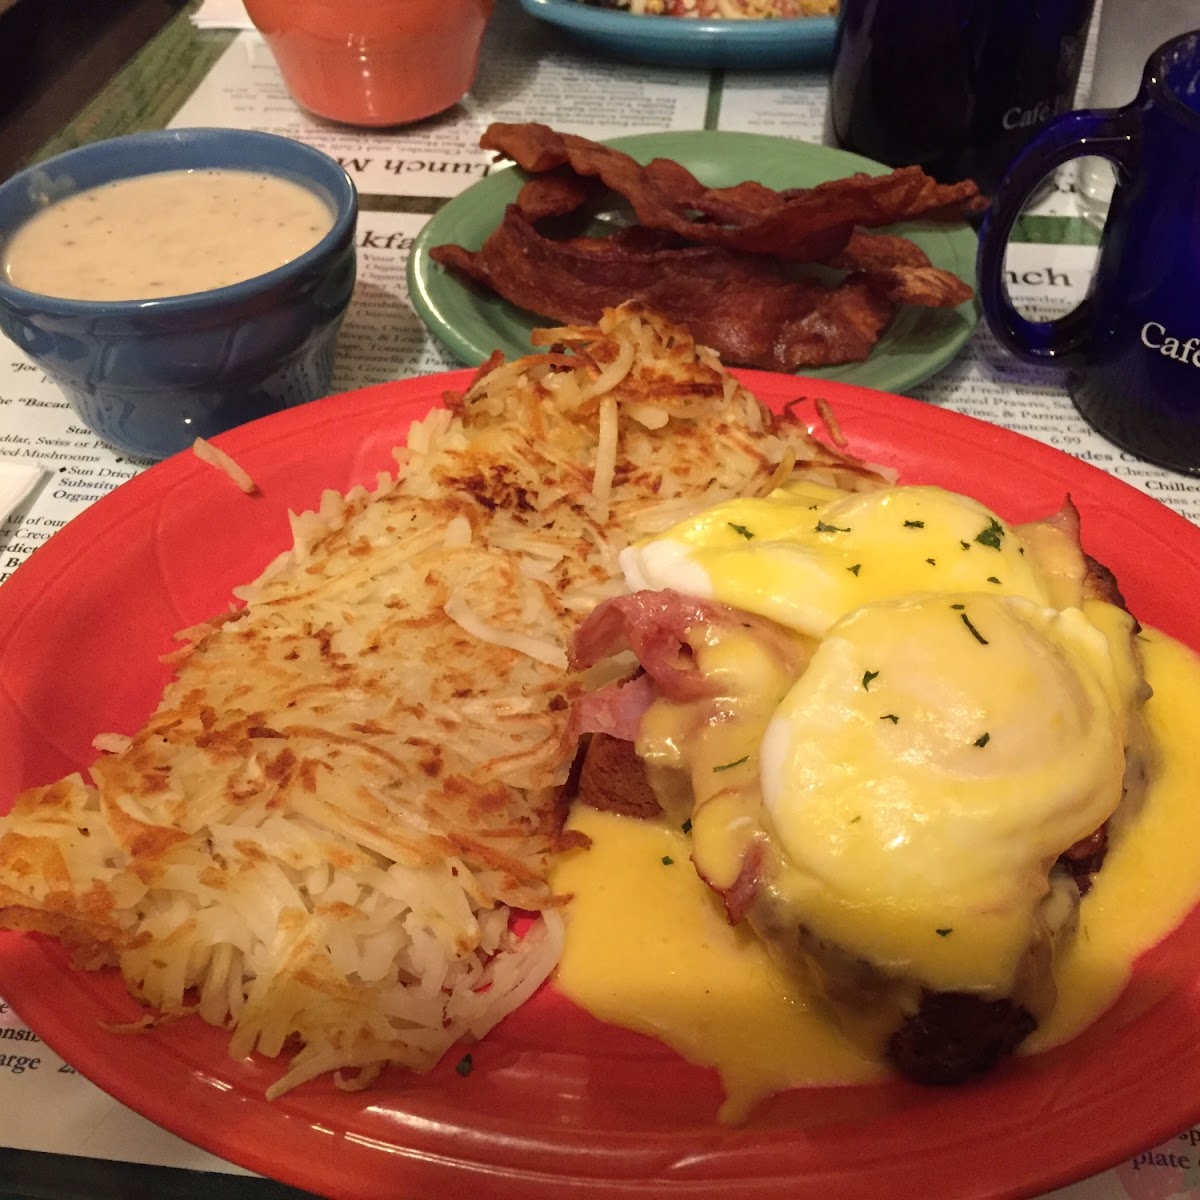 GF Traditional Eggs Benedict which comes with 2 perfect eggs, thinly-sliced deli ham, cheese and a huge scoop of hash browns (you can add gf sausage gravy). Everything was piping hot and delish.